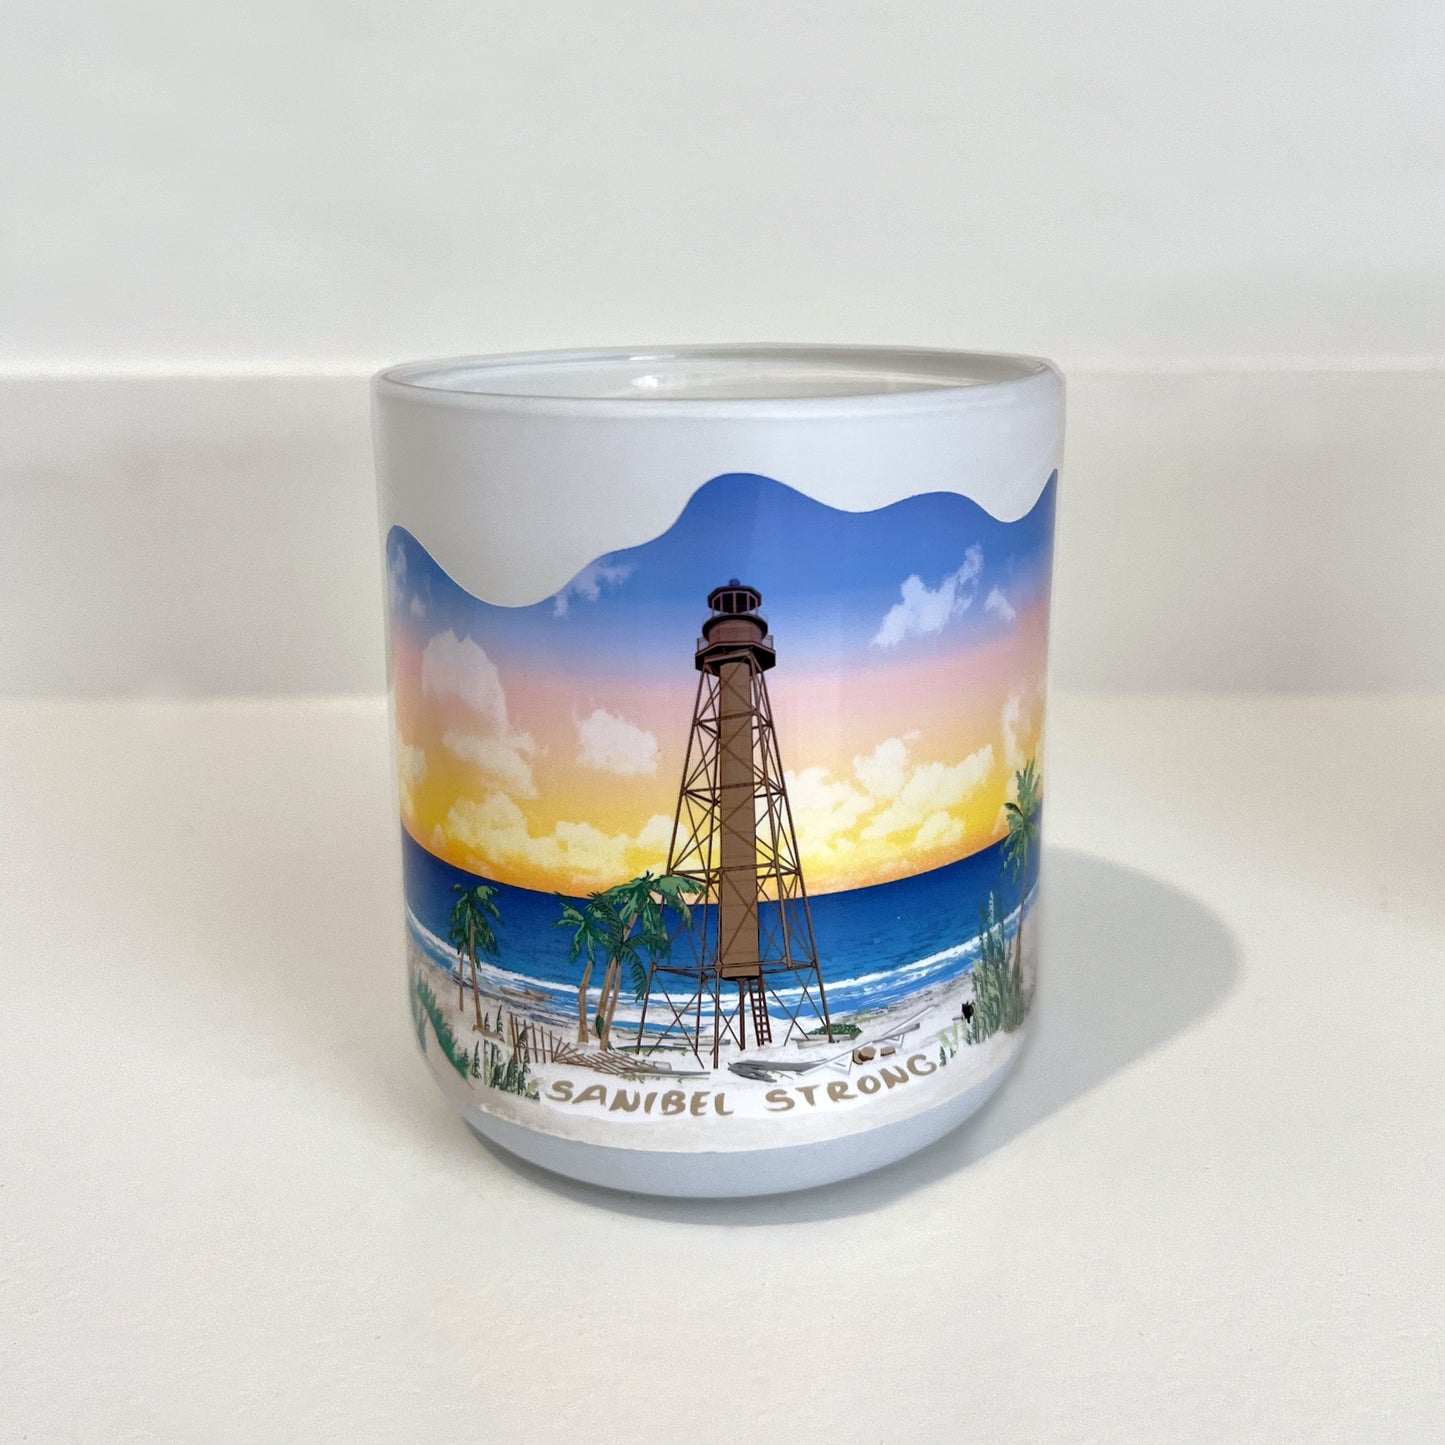 Cat's Meow Candle - Sanibel Strong Lighthouse - 12 oz